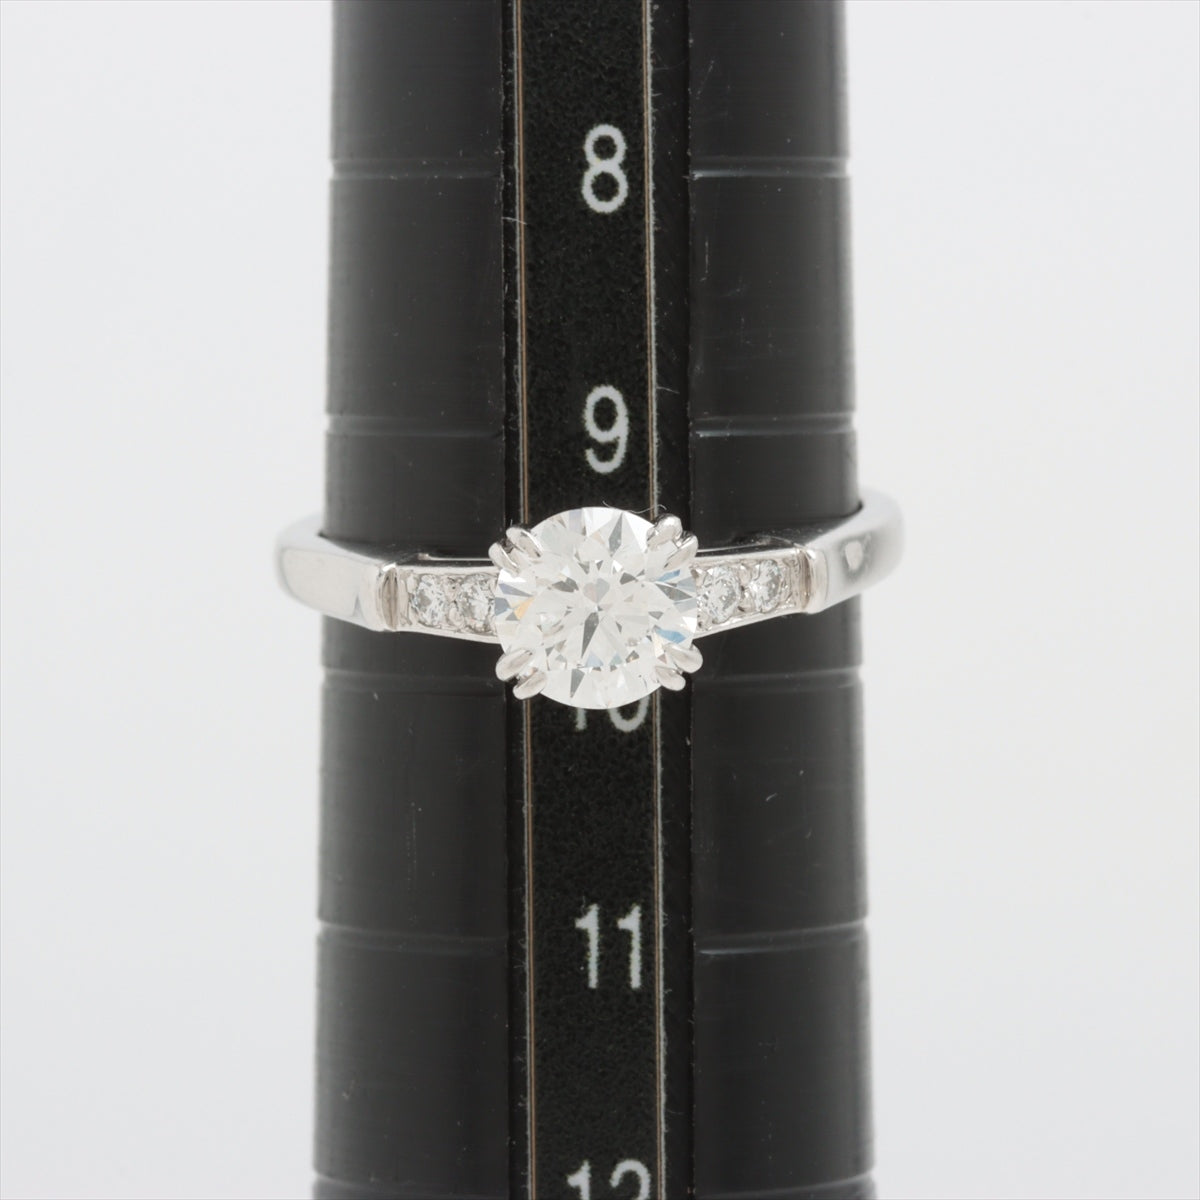 Harry Winston Triste Diamond Ring Pt950 3.5g 0.70 F VS1 VG NONE Published by GIA 2005